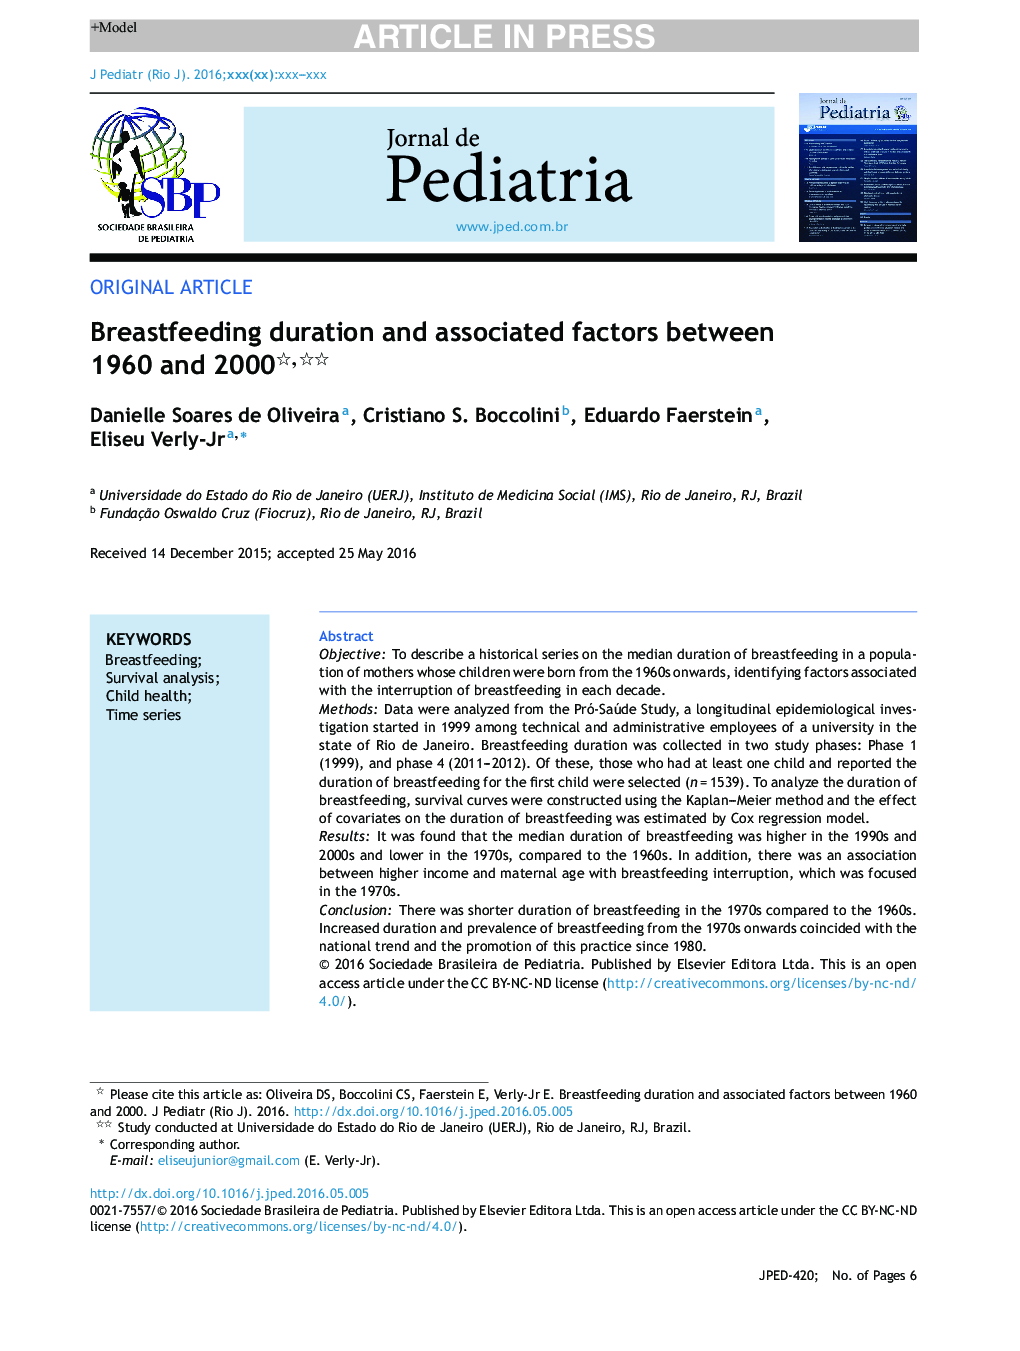 Breastfeeding duration and associated factors between 1960 and 2000